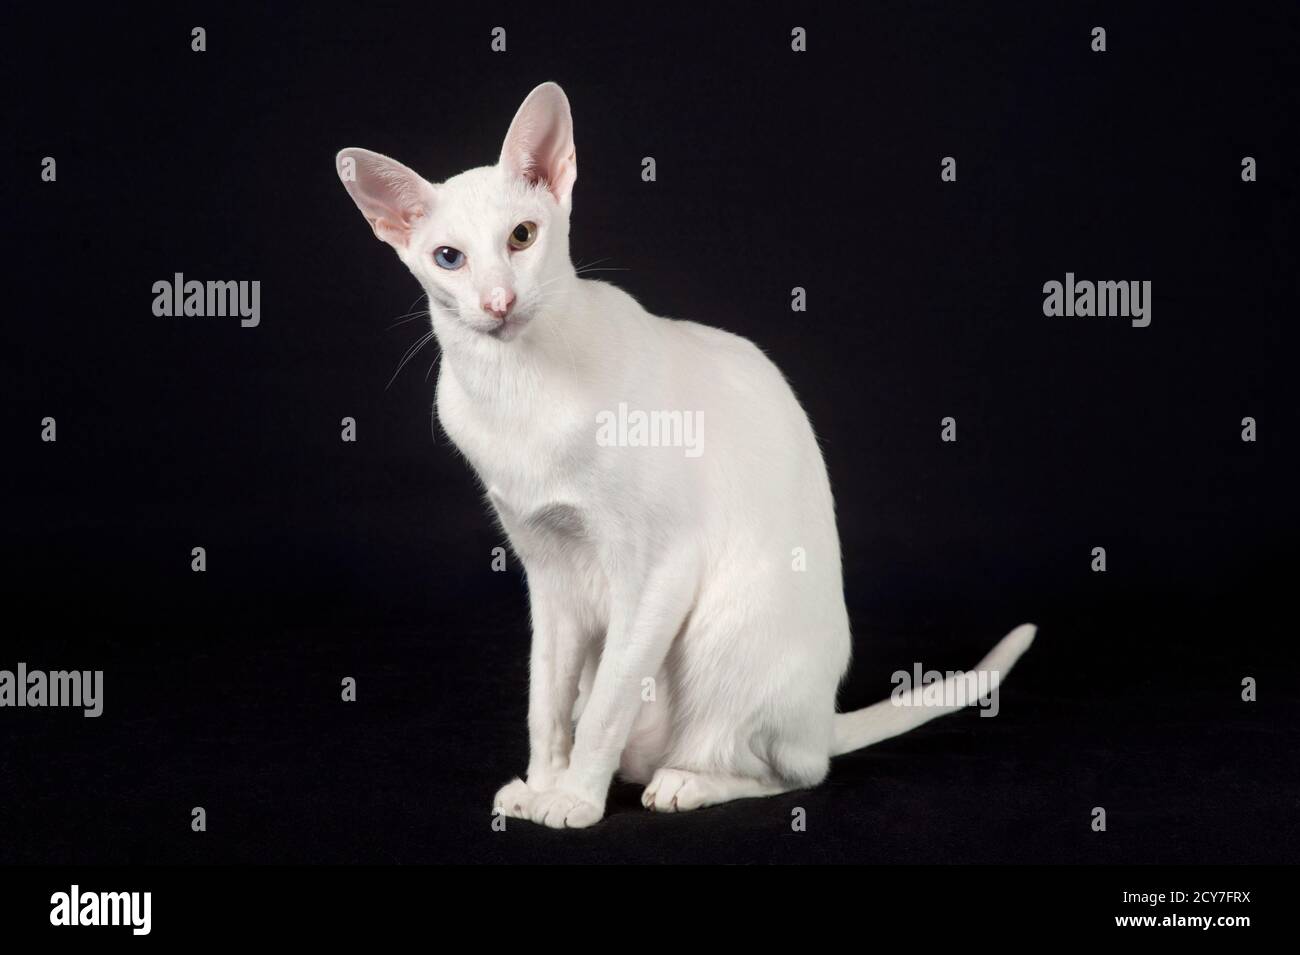 White oriental shorthair cat with two different color eyes. Stock Photo